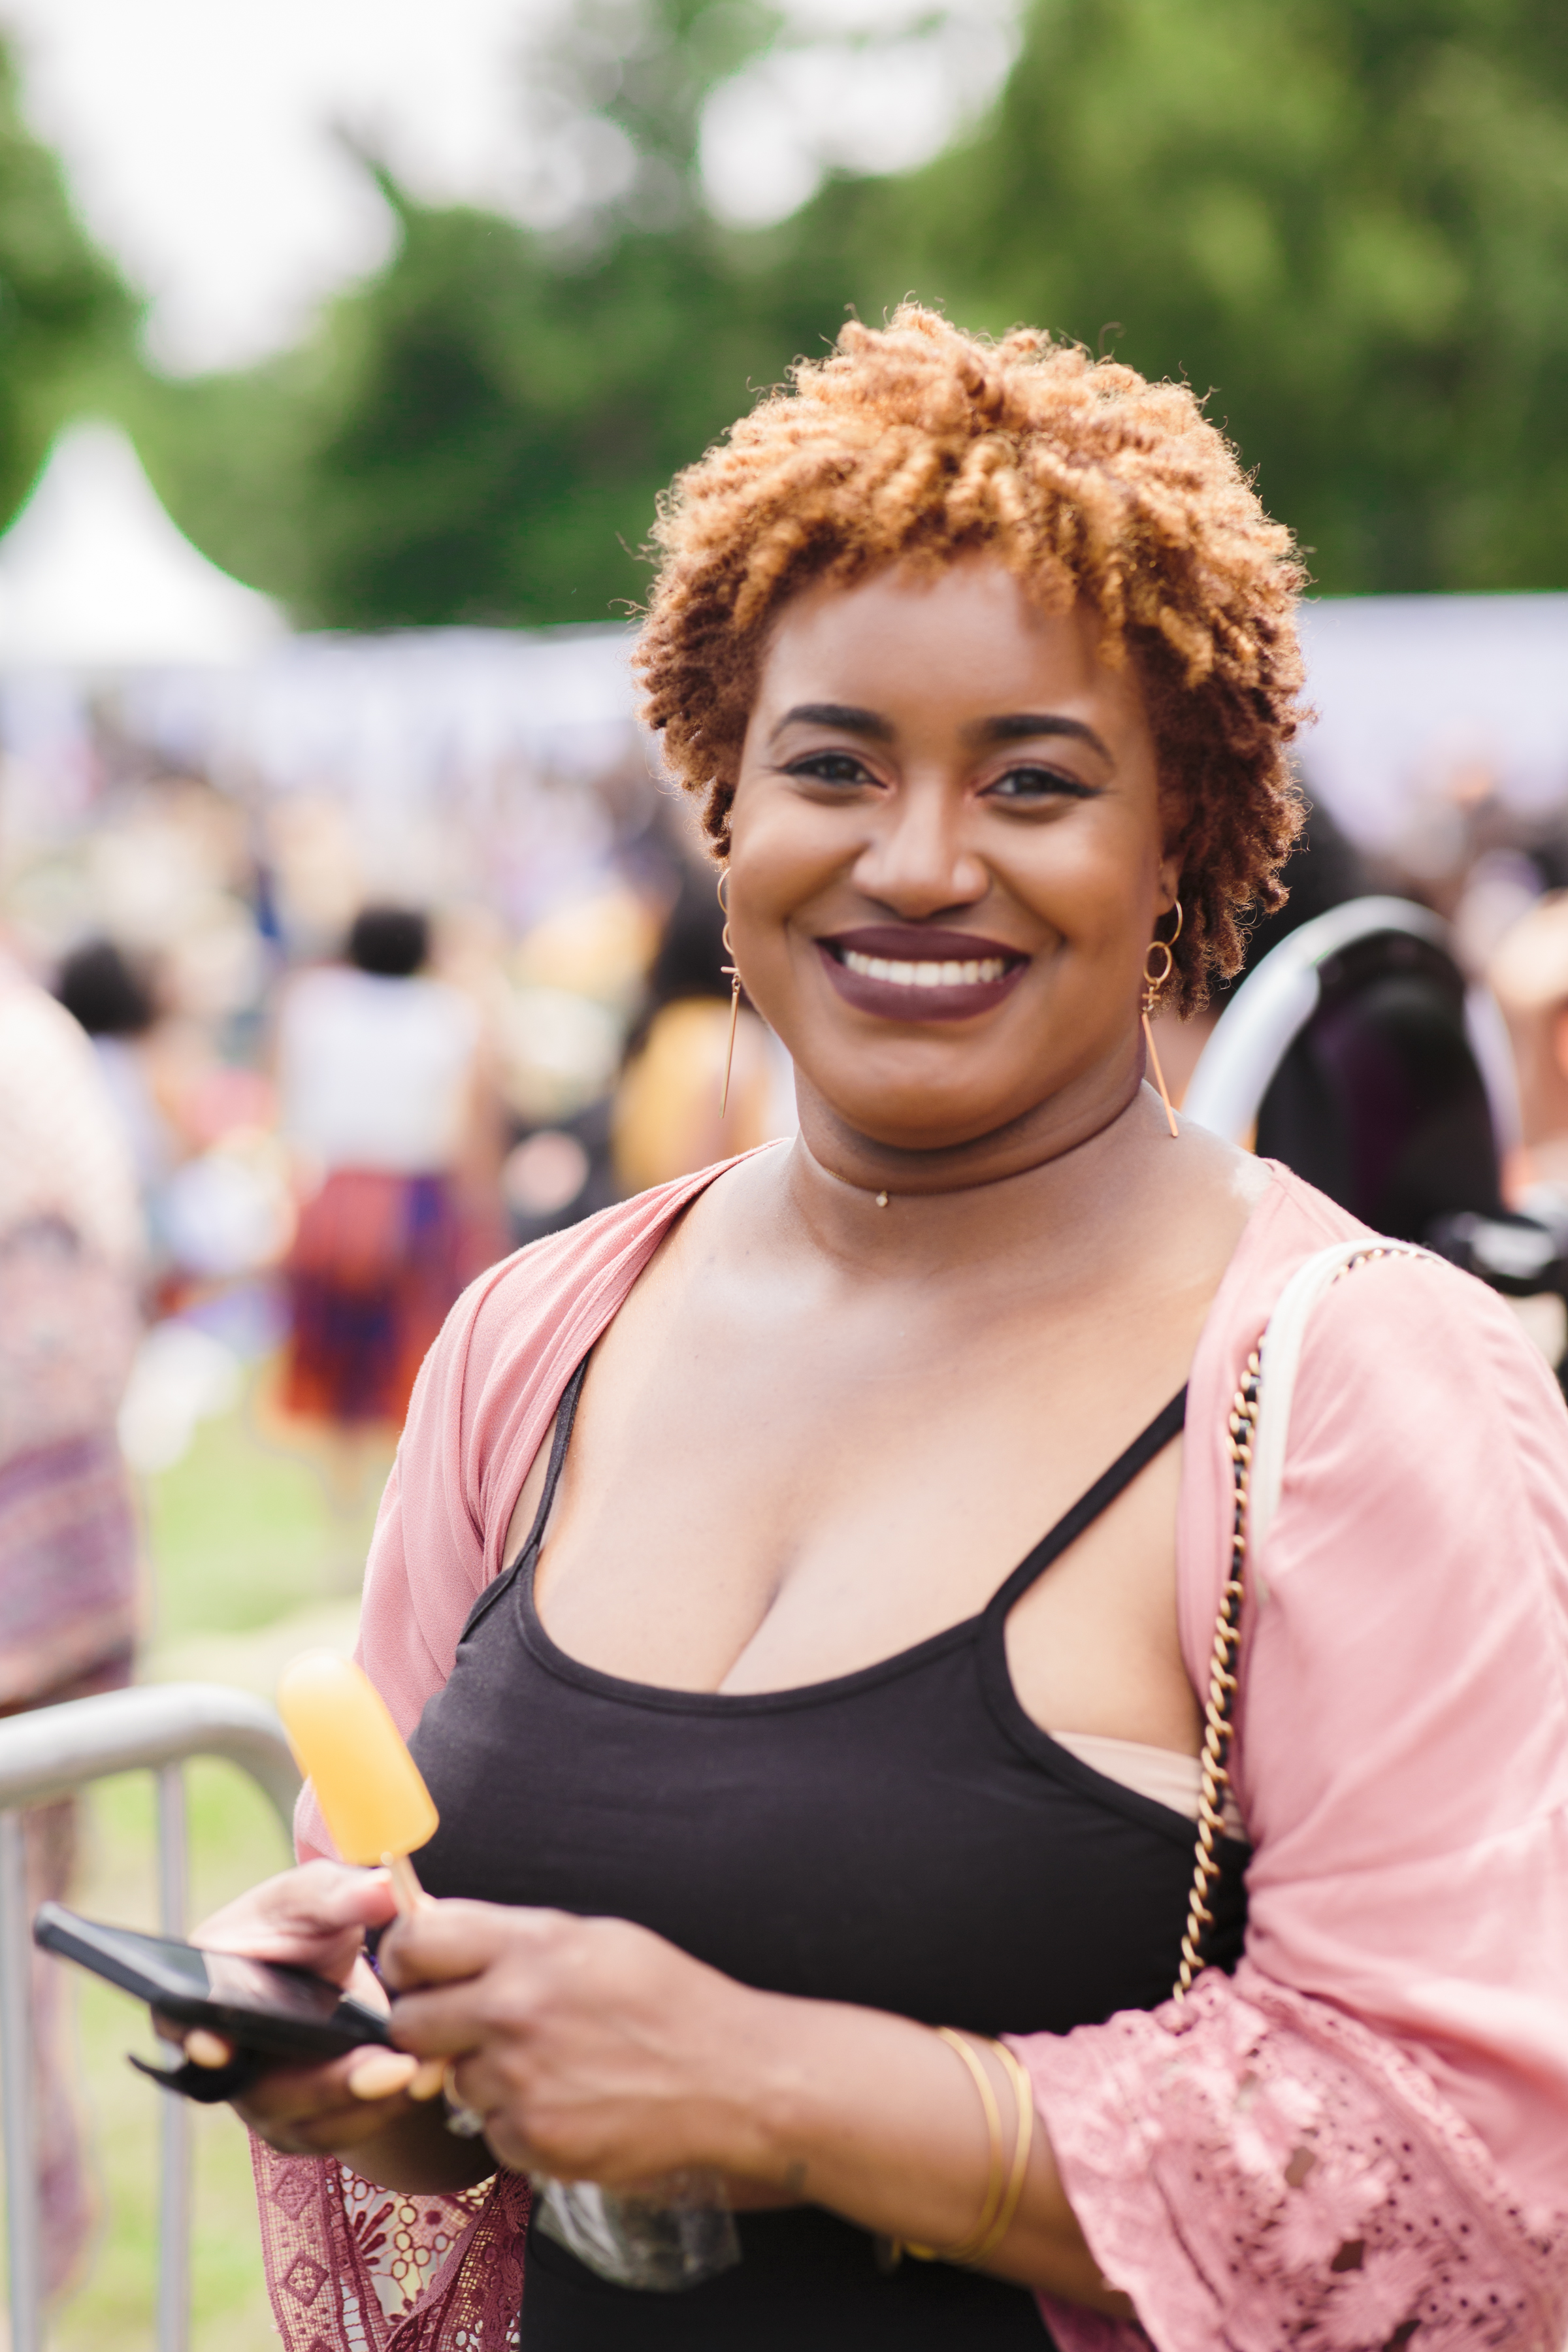  The Curly Girl Collective Presents: CURLFEST 2018 - July 21st, 2018 - Photography Coverage Provided By: KOLIN MENDEZ | © 2018 KOLIN MENDEZ PHOTOGRAPHY - www.kolinmendez.com 